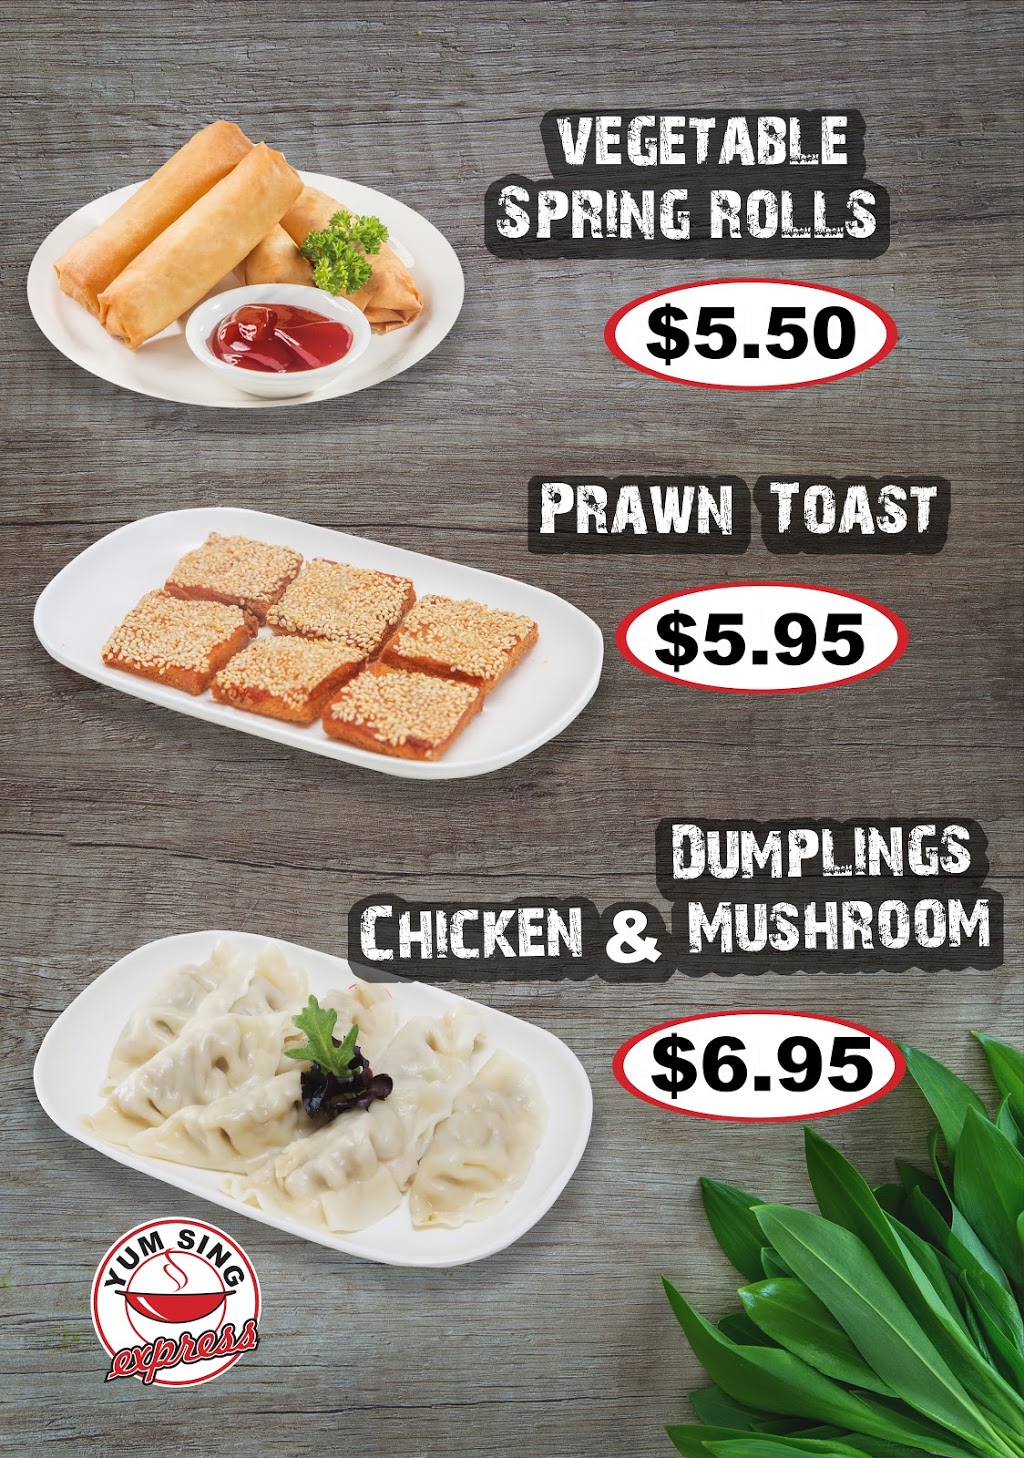 Yum Sing Express Collinswood | 3/31 North East Road, Collinswood SA 5081, Australia | Phone: (08) 8344 8888